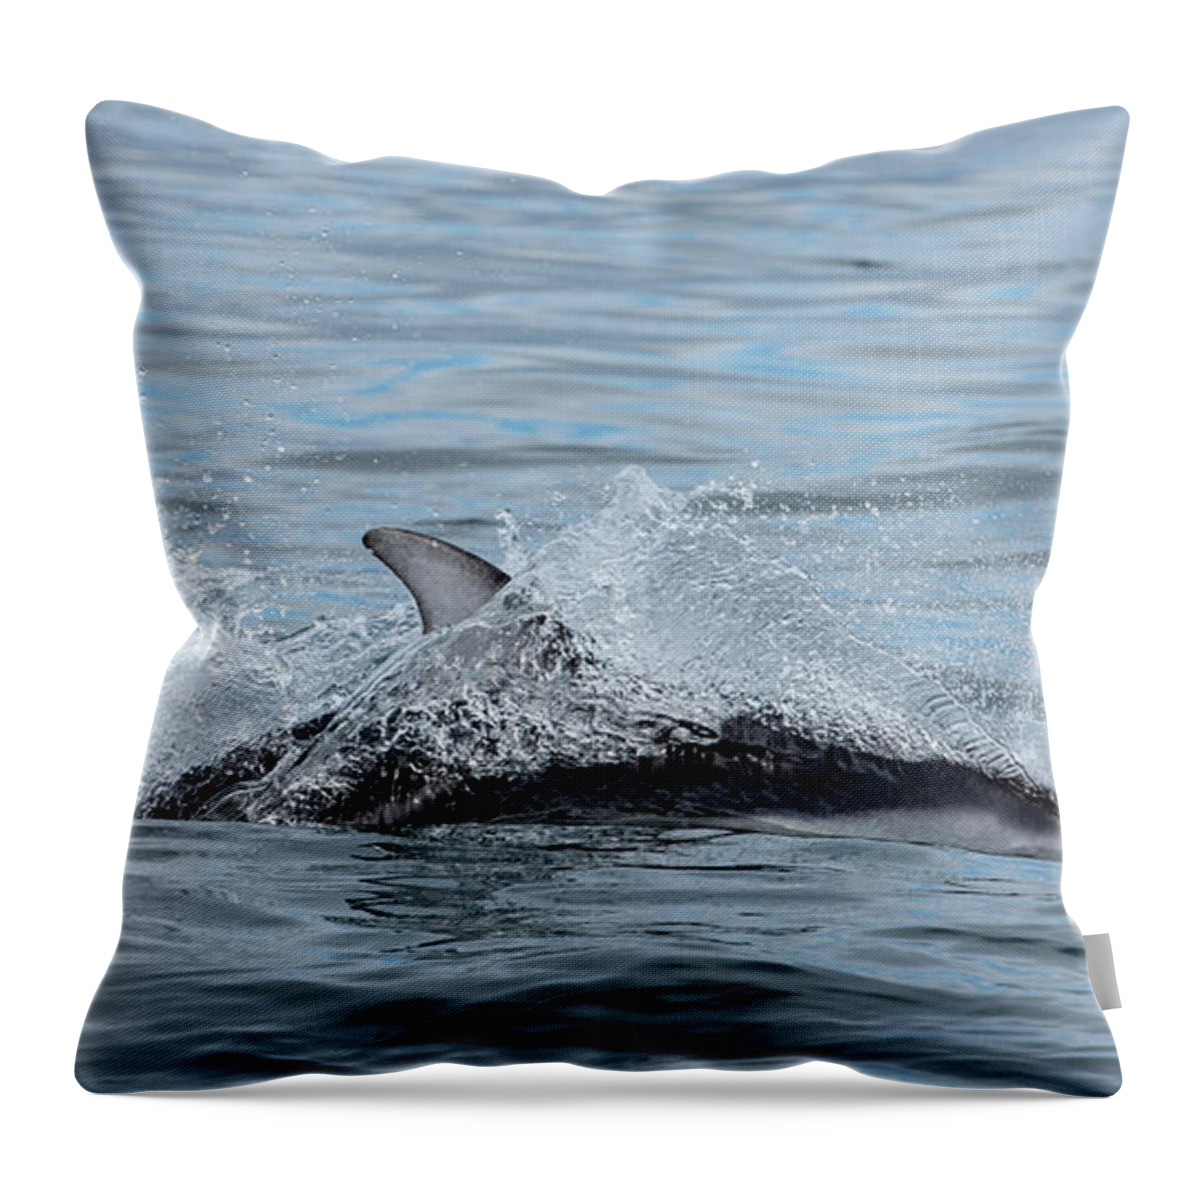 White Throw Pillow featuring the photograph Dolphin by Canadart -